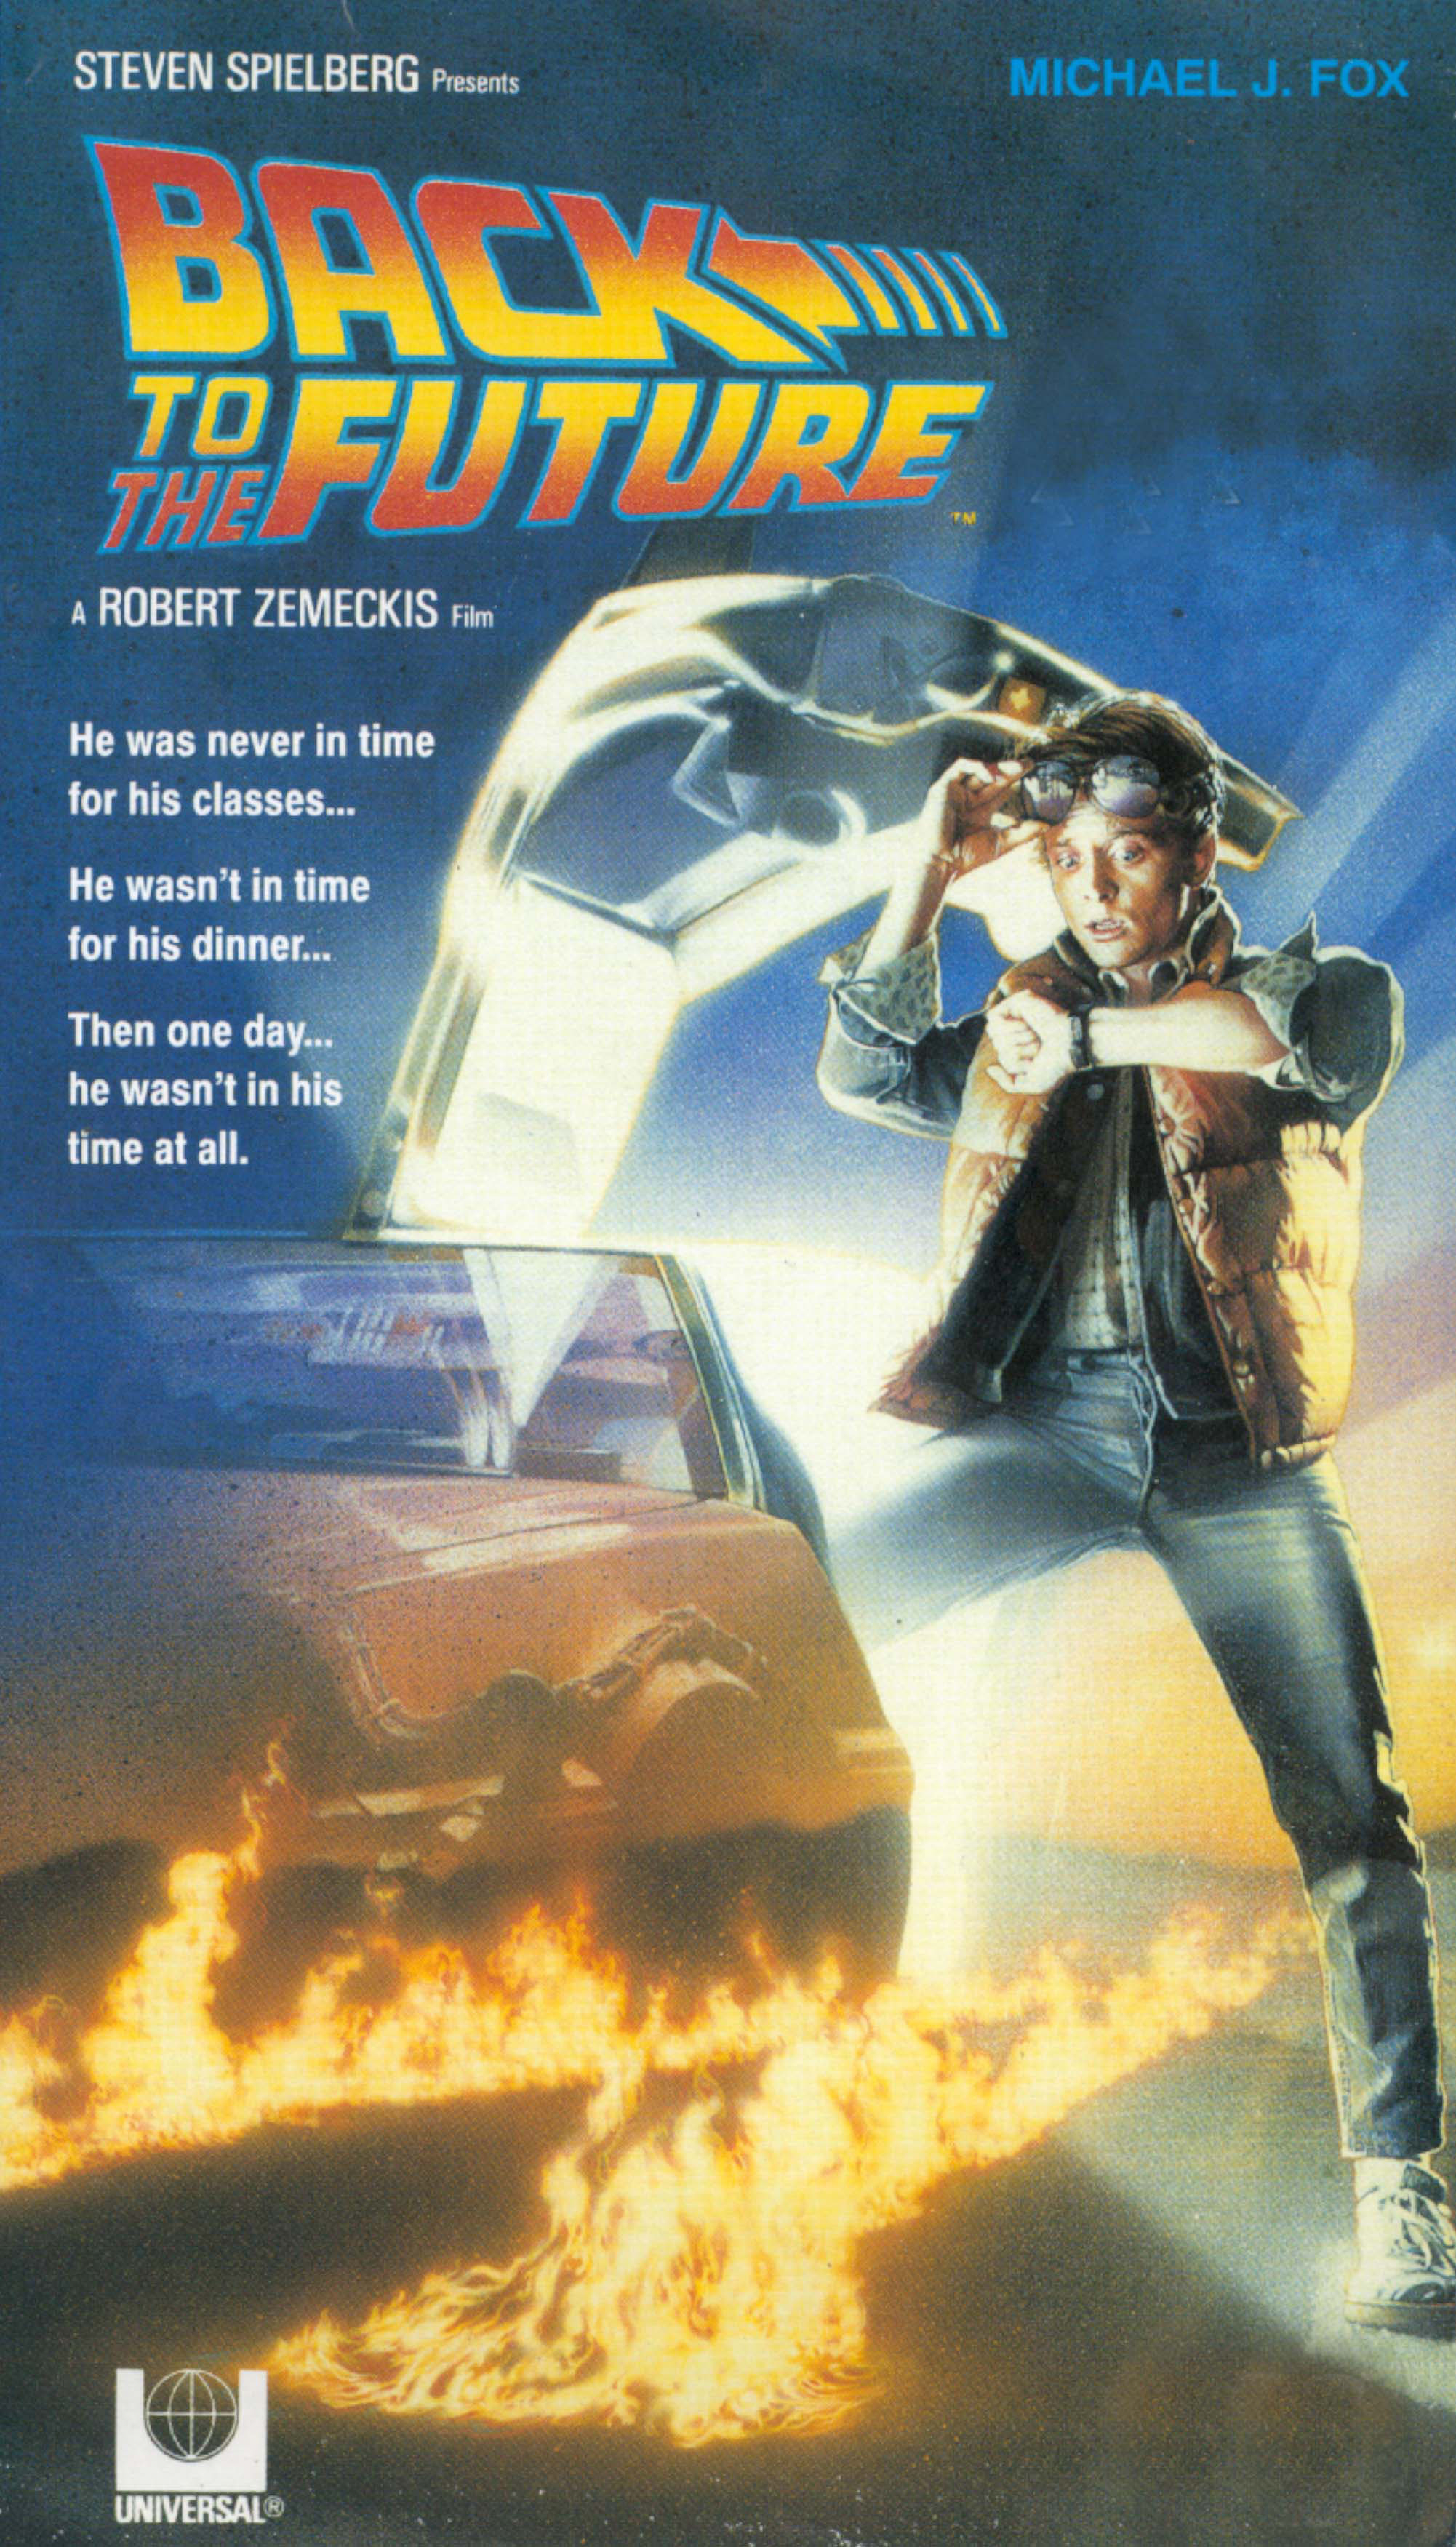 The theatrical poster for &quot;Back to the Future&quot; with Marty McFly next to the DeLorean